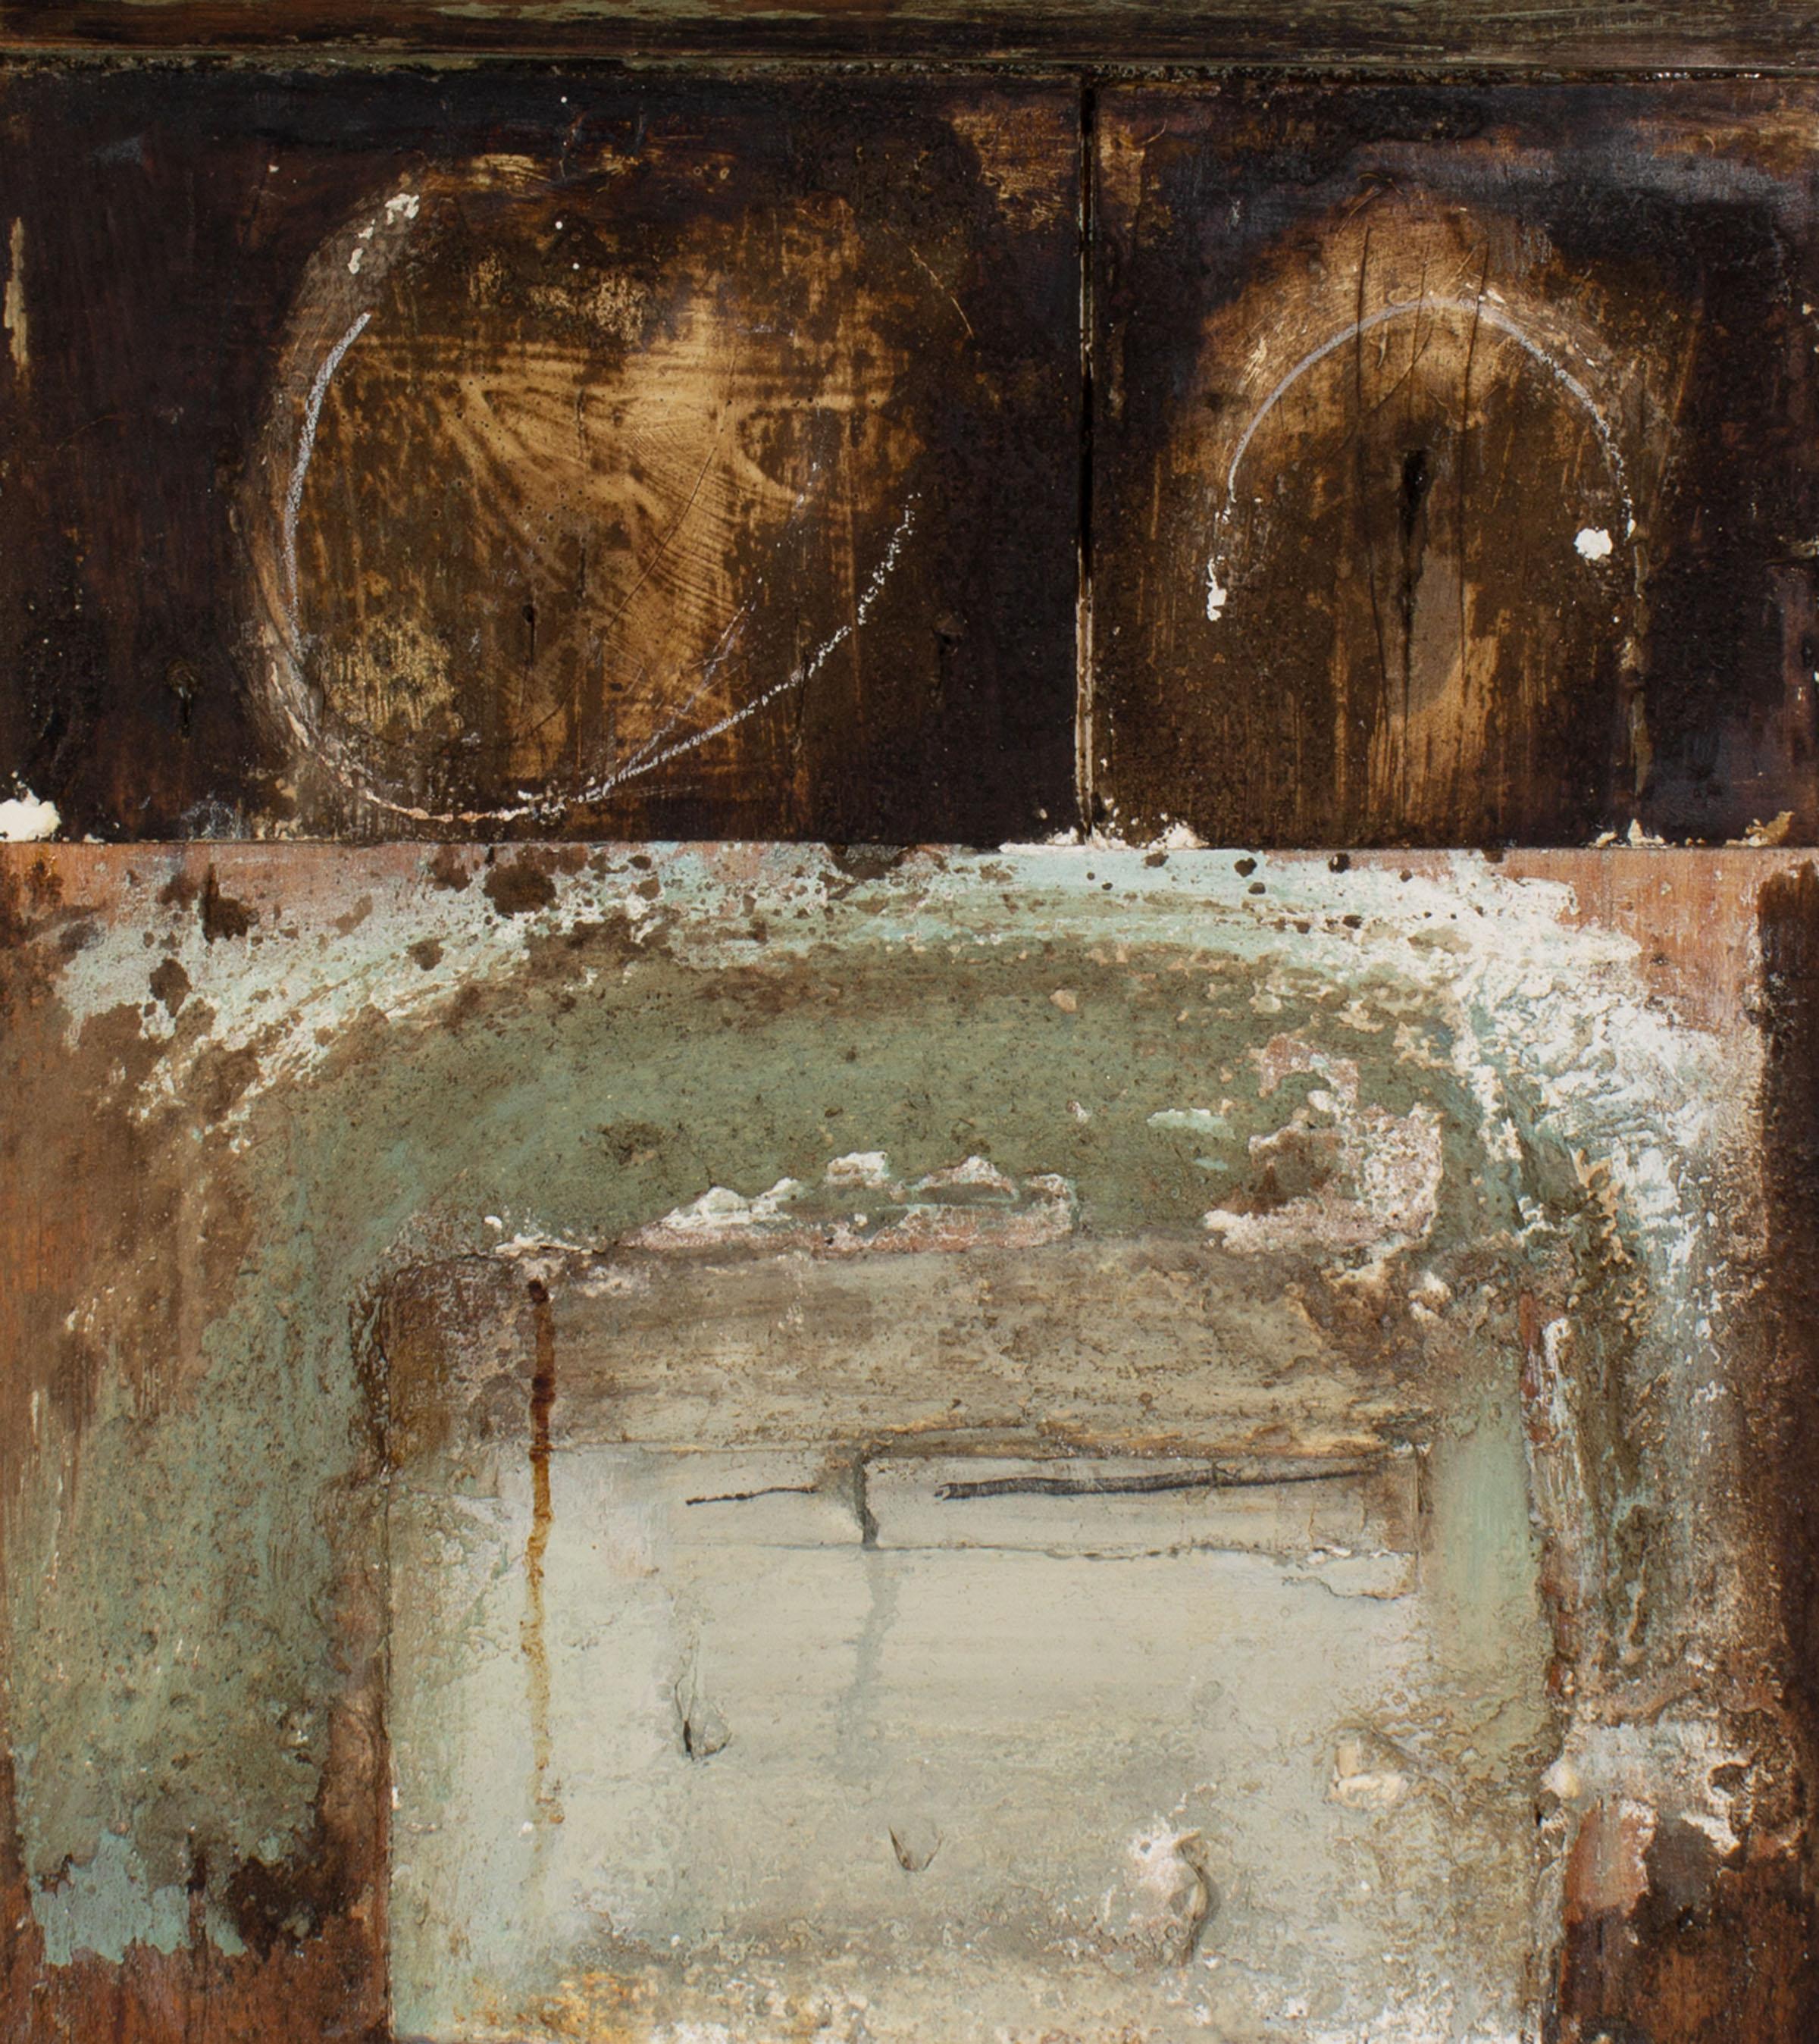 A 1999 mixed media wall assemblage titled ?Asoko VIII ?by the American artist Juliet Holland (1937-2017). Layers of paint in brown, green, white and gray are scratched and chipped away to create a textured palimpsest in this mixed media assemblage.